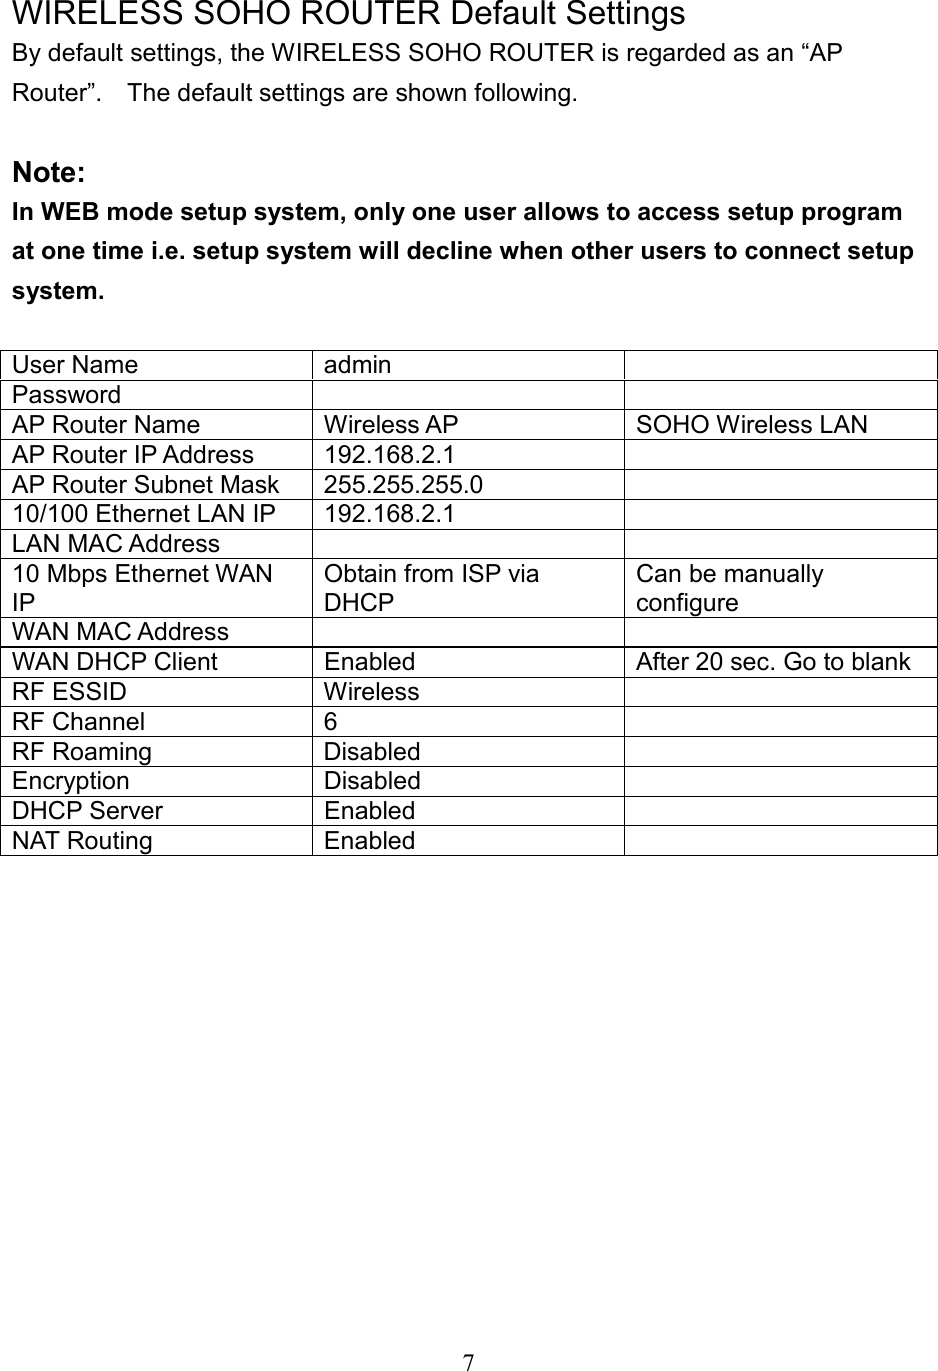  7  WIRELESS SOHO ROUTER Default Settings By default settings, the WIRELESS SOHO ROUTER is regarded as an “AP Router”.    The default settings are shown following.  Note: In WEB mode setup system, only one user allows to access setup program at one time i.e. setup system will decline when other users to connect setup system.     User Name  admin   Password    AP Router Name  Wireless AP  SOHO Wireless LAN AP Router IP Address  192.168.2.1   AP Router Subnet Mask  255.255.255.0   10/100 Ethernet LAN IP  192.168.2.1   LAN MAC Address     10 Mbps Ethernet WAN IP Obtain from ISP via DHCP Can be manually configure WAN MAC Address     WAN DHCP Client  Enabled  After 20 sec. Go to blank RF ESSID  Wireless   RF Channel    6   RF Roaming  Disabled   Encryption Disabled   DHCP Server  Enabled   NAT Routing  Enabled     